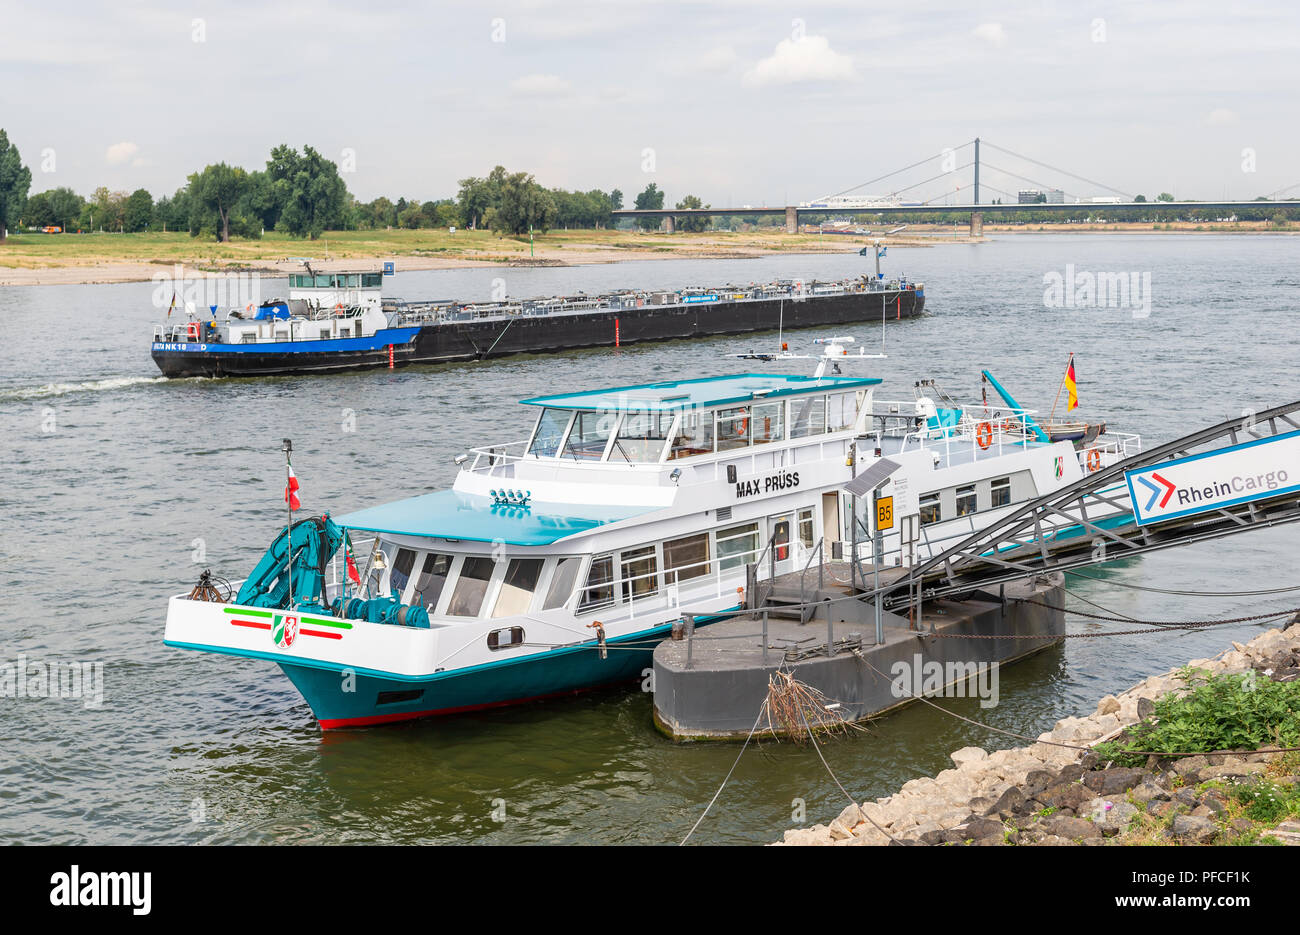 21 August 2018, Germany, Düsseldorf: The laboratory ship "Max Prüss" of the State Office for Nature, Environment and Consumer Protection (LANUV) is moored on the Rhine. The ship was the first inland vessel in North Rhine-Westphalia to be retrofitted with an exhaust gas purification system. Photo: Christophe Gateau/dpa Stock Photo